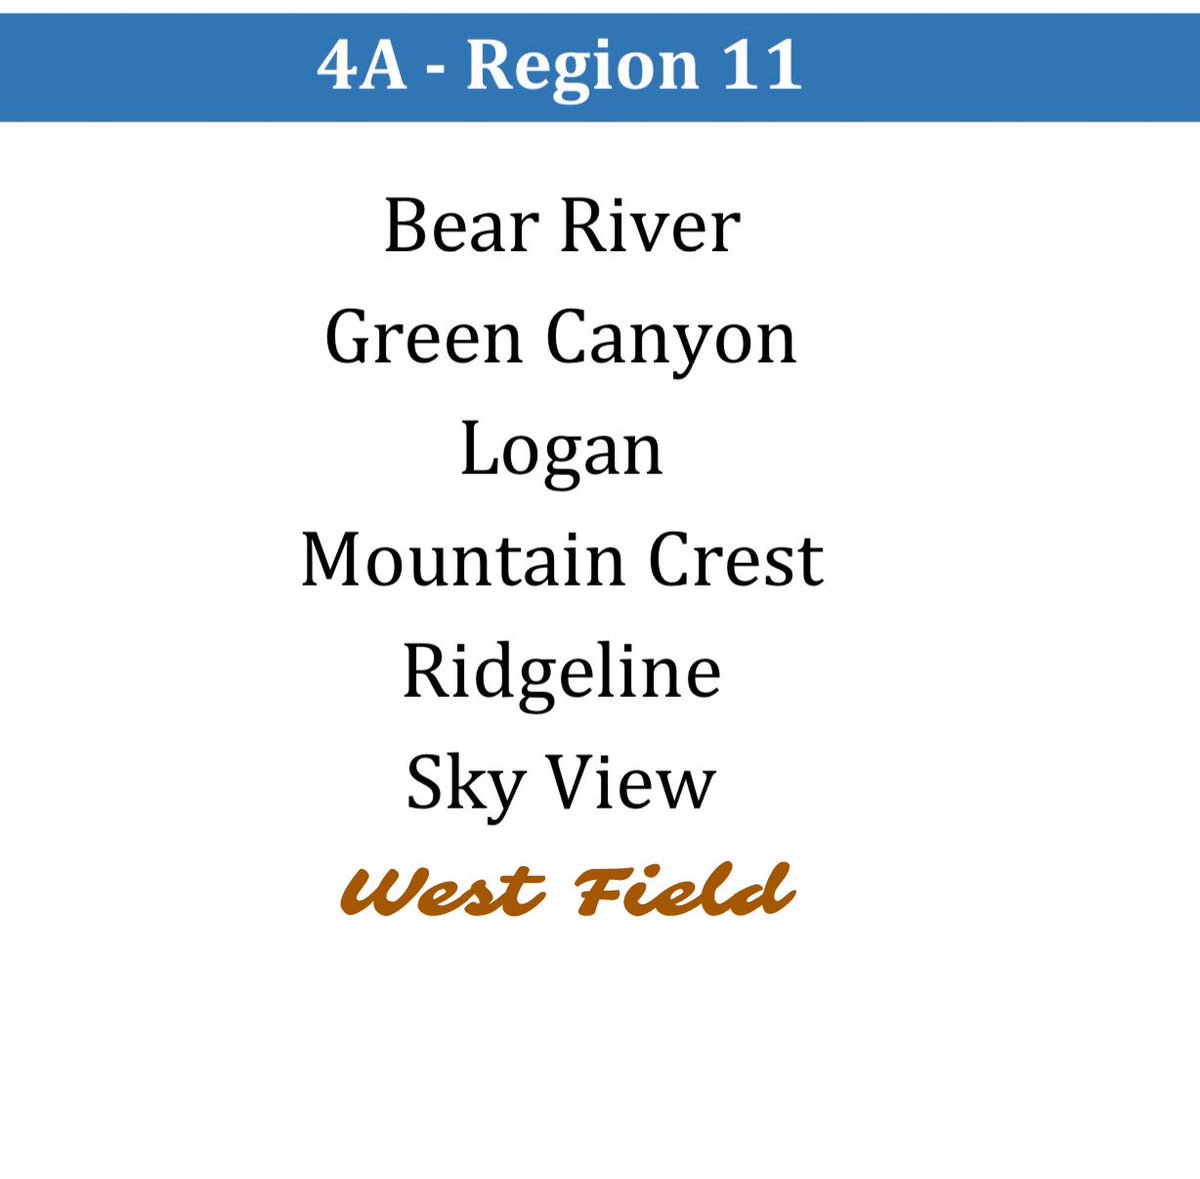 IT’S OFFICIAL! We will be 4A/Region 11 in our inaugural year as a school. The six schools currently in Region 11 have already been very welcoming. We look forward to competing in one of the best regions, in all classes, in the entire state! @UHSAAinfo